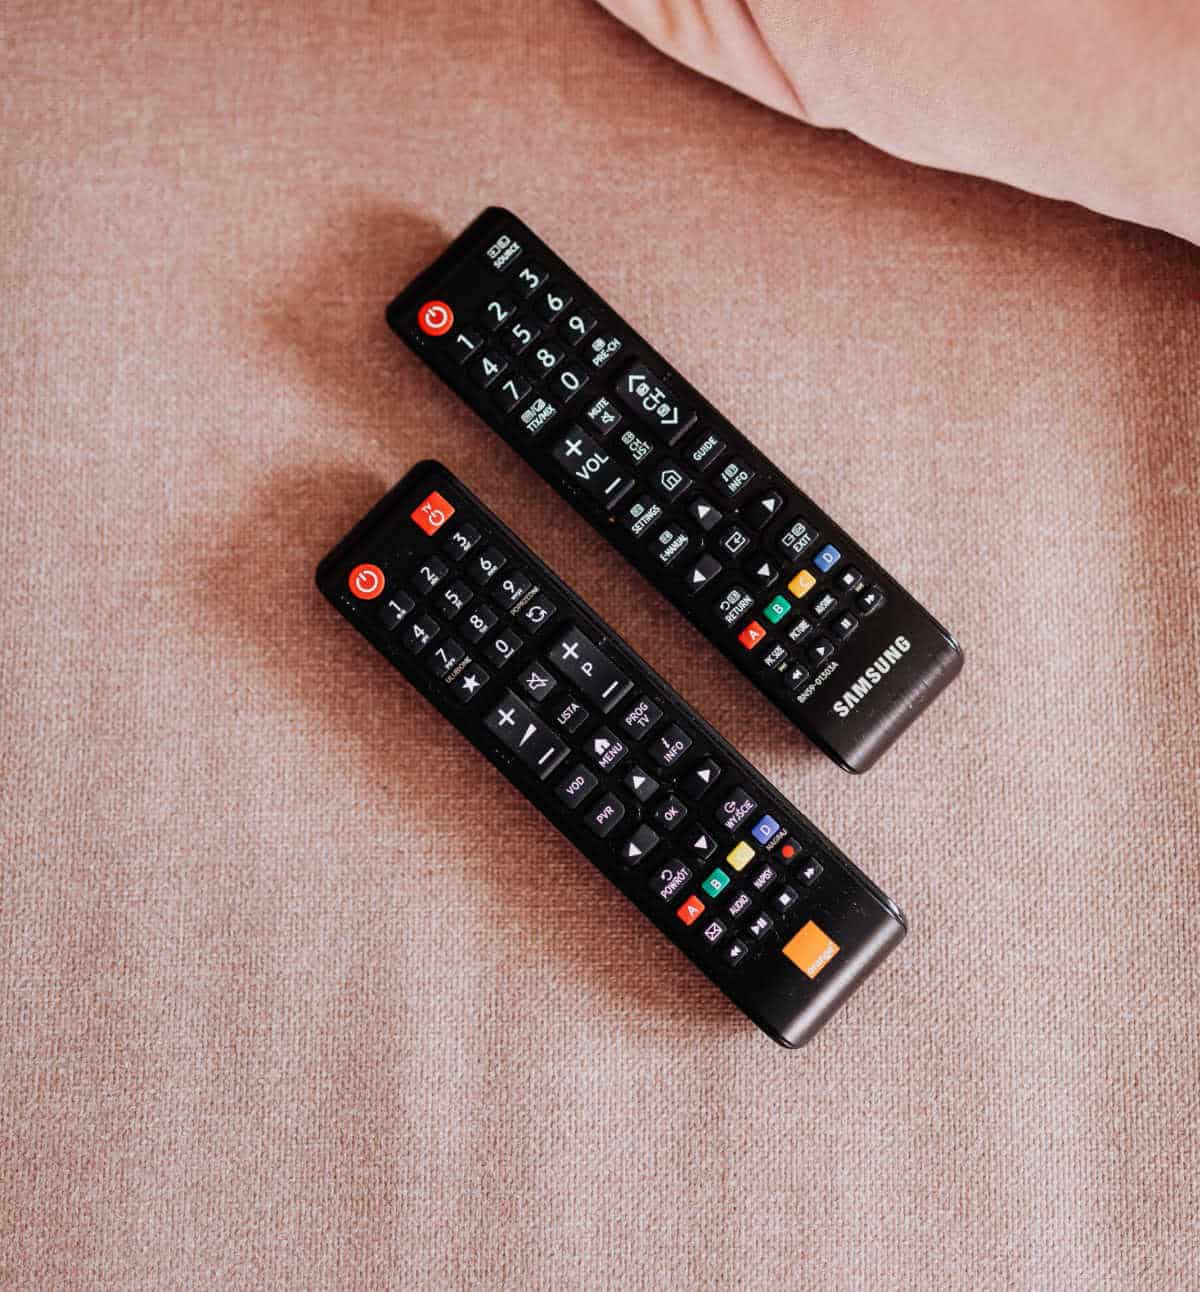 Two TV remote controls on a pink sofa